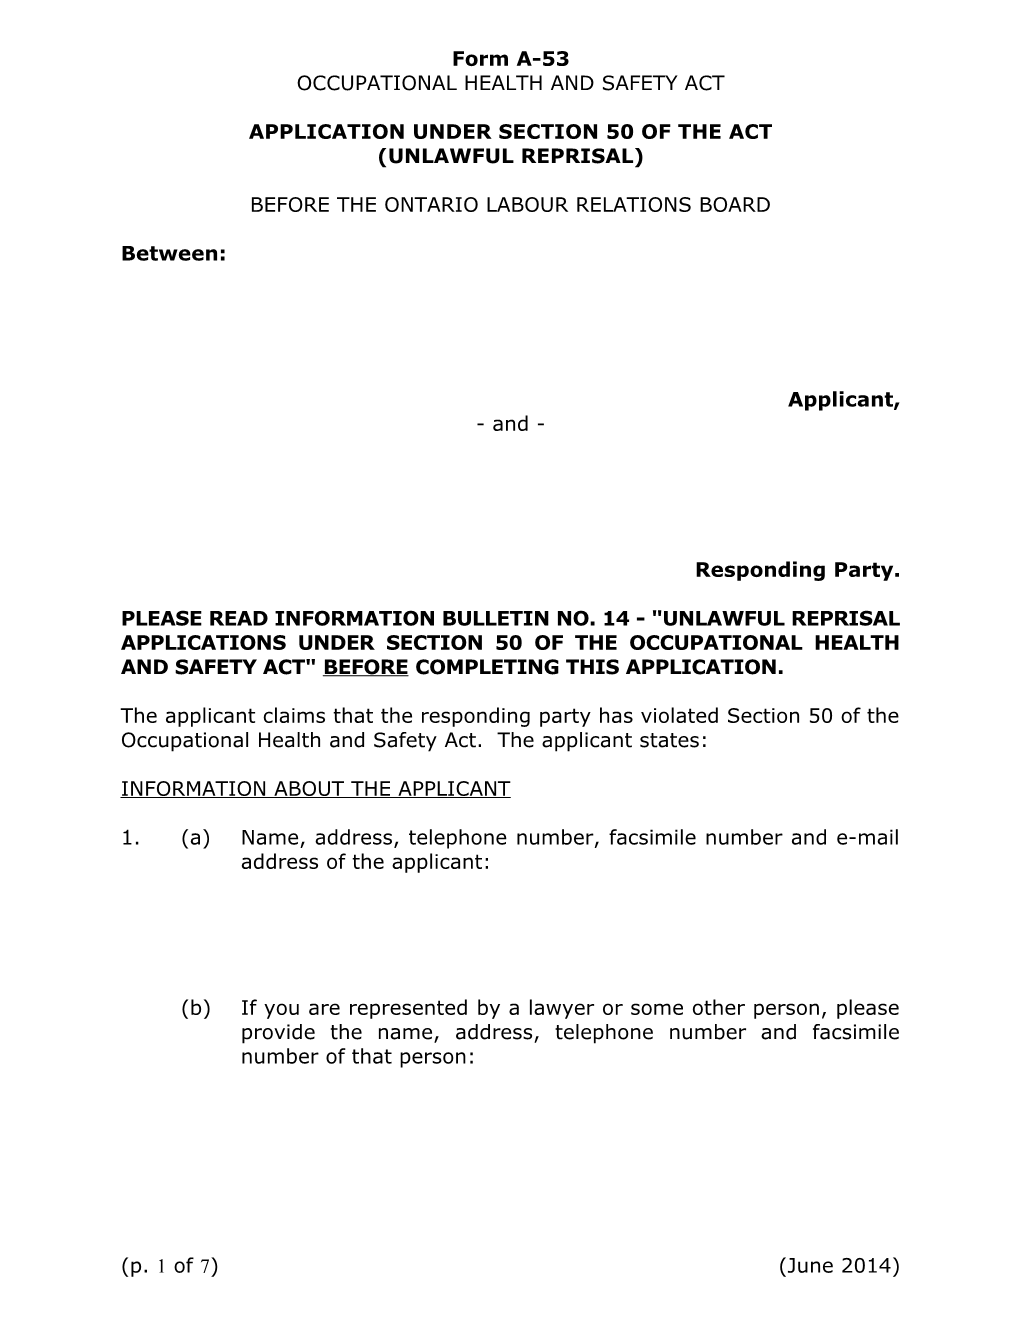 Application Under Section 50 of the Act